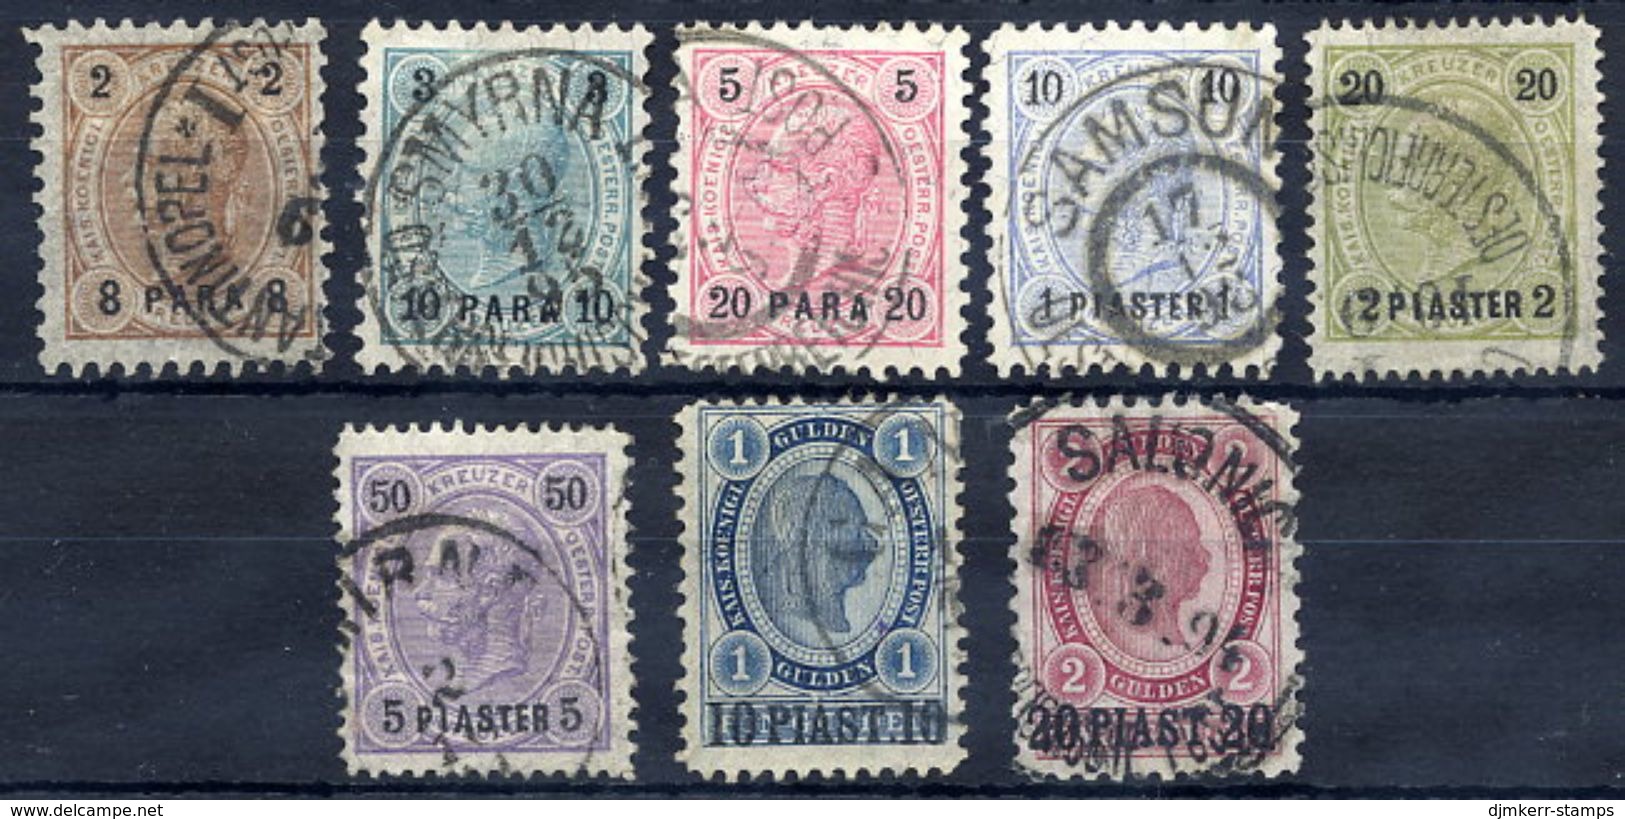 AUSTRIA PO In The LEVANT 1890-92 Surcharge Issues Used.  Michel 20-27 - Eastern Austria